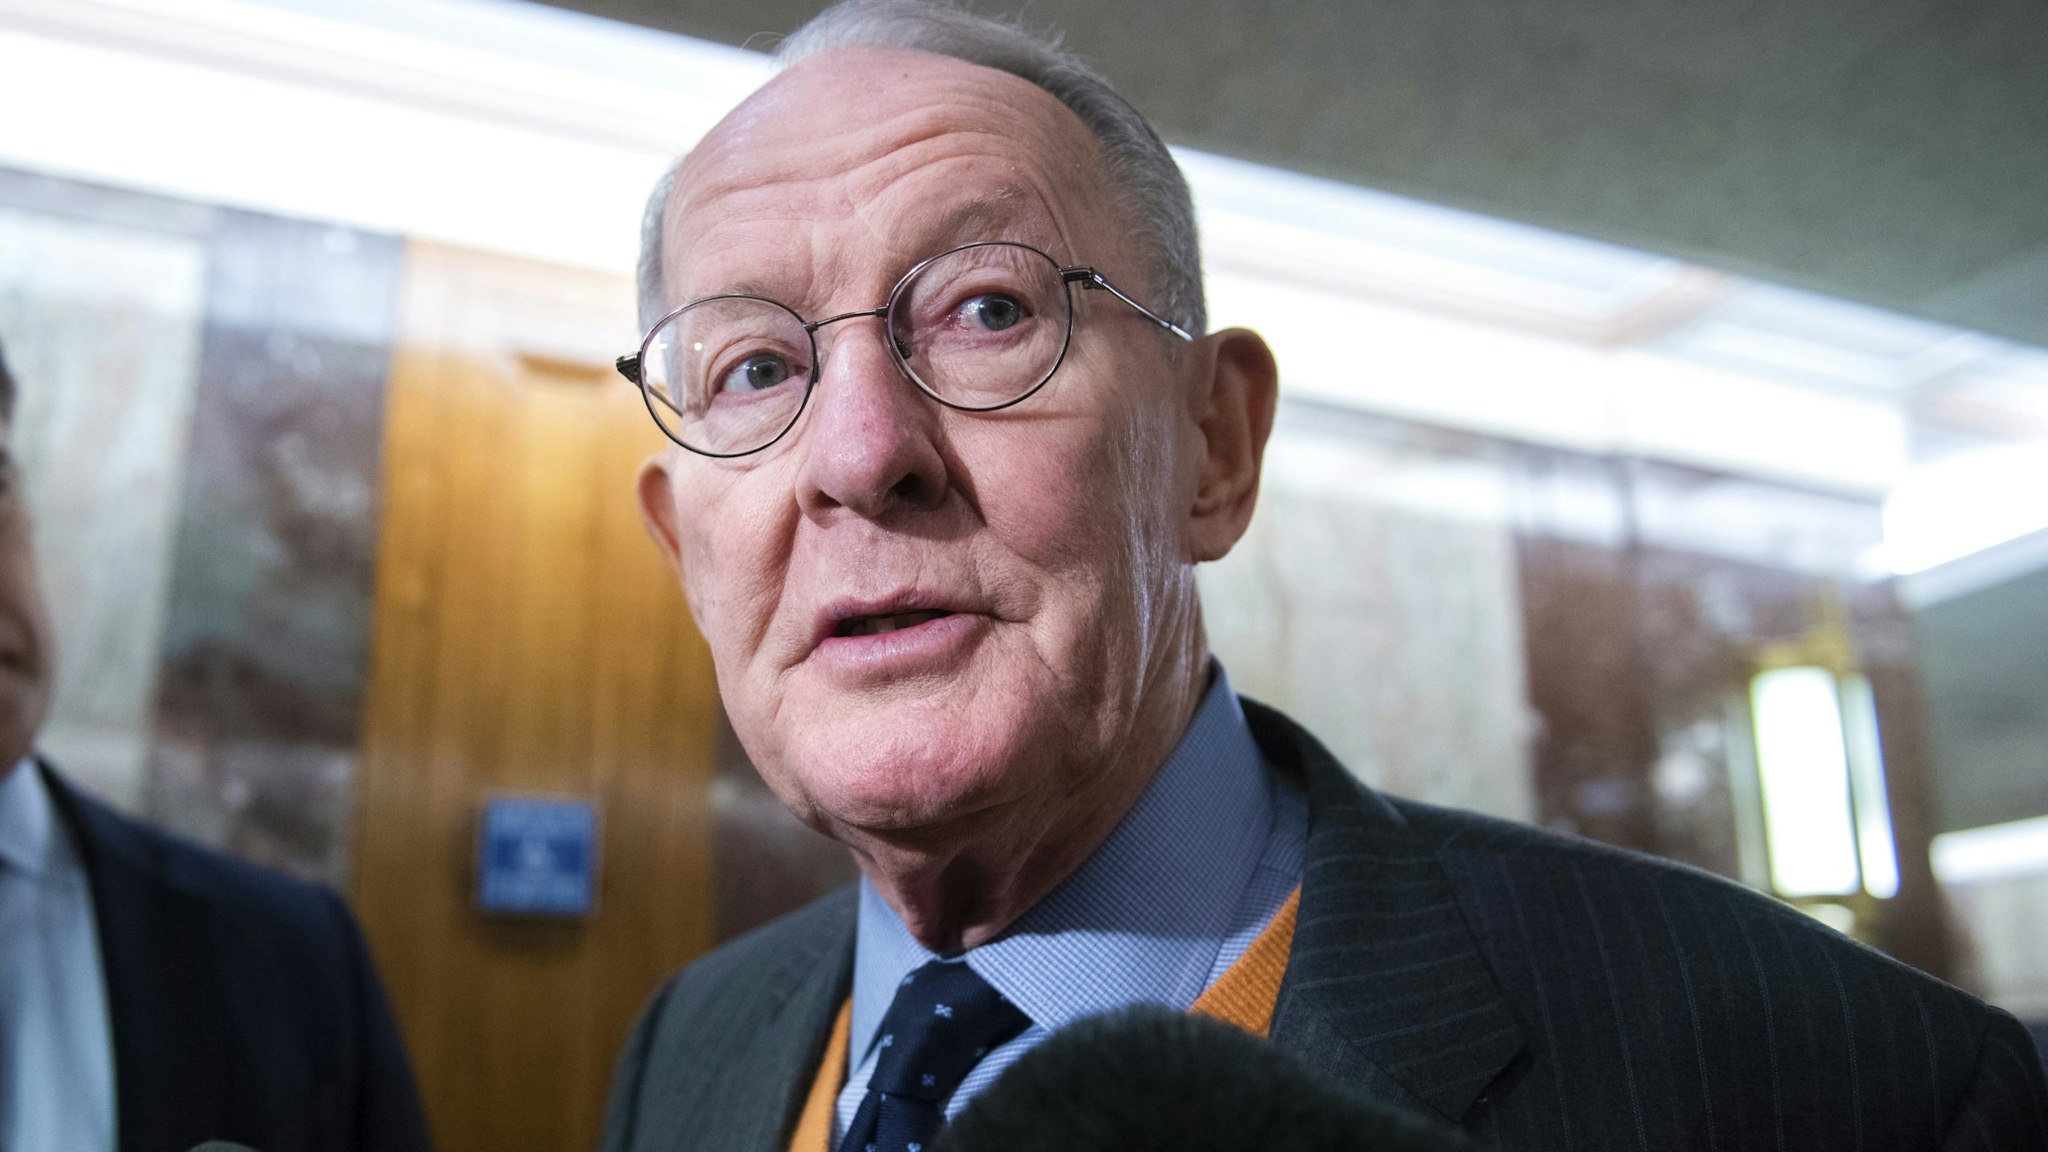 UNITED STATES - JANUARY 24: Chairman Lamar Alexander, R-Tenn., arrives for a senators briefing with government health officials on the coronavirus at the Senate Health, Education, Labor, and Pensions Committee in Dirksen Building on Friday, January 24, 2020.